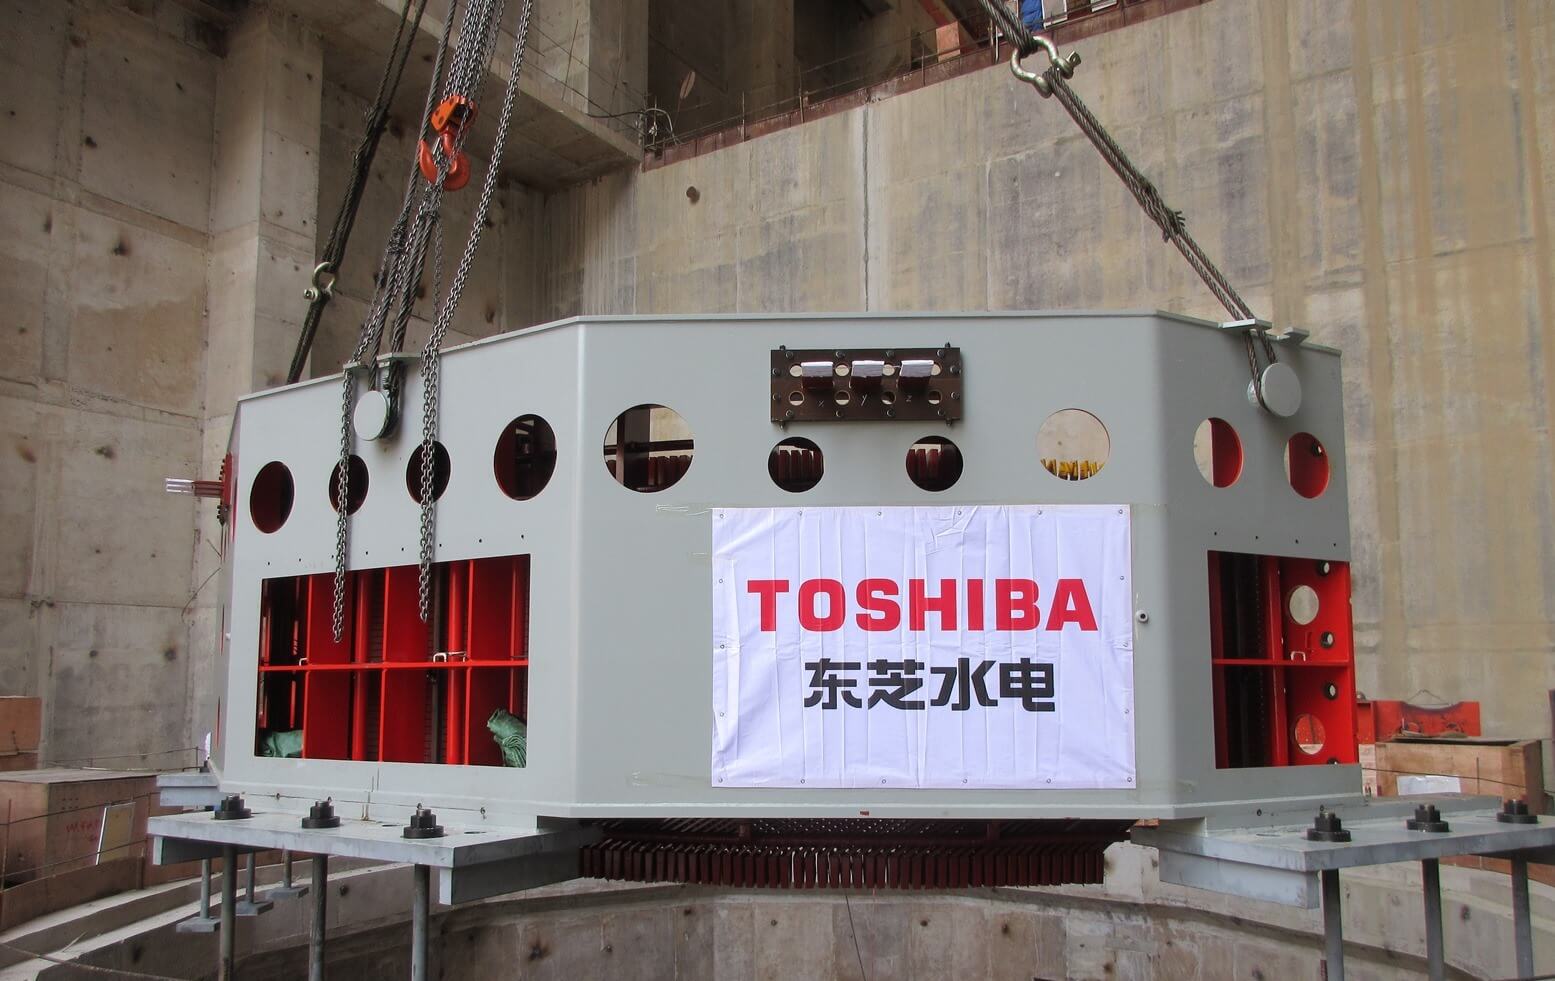 Vietnam’s Trung Son Hydro Power Station Units 1 to 4 Start Operations with Toshiba Hydro Turbines and Generators